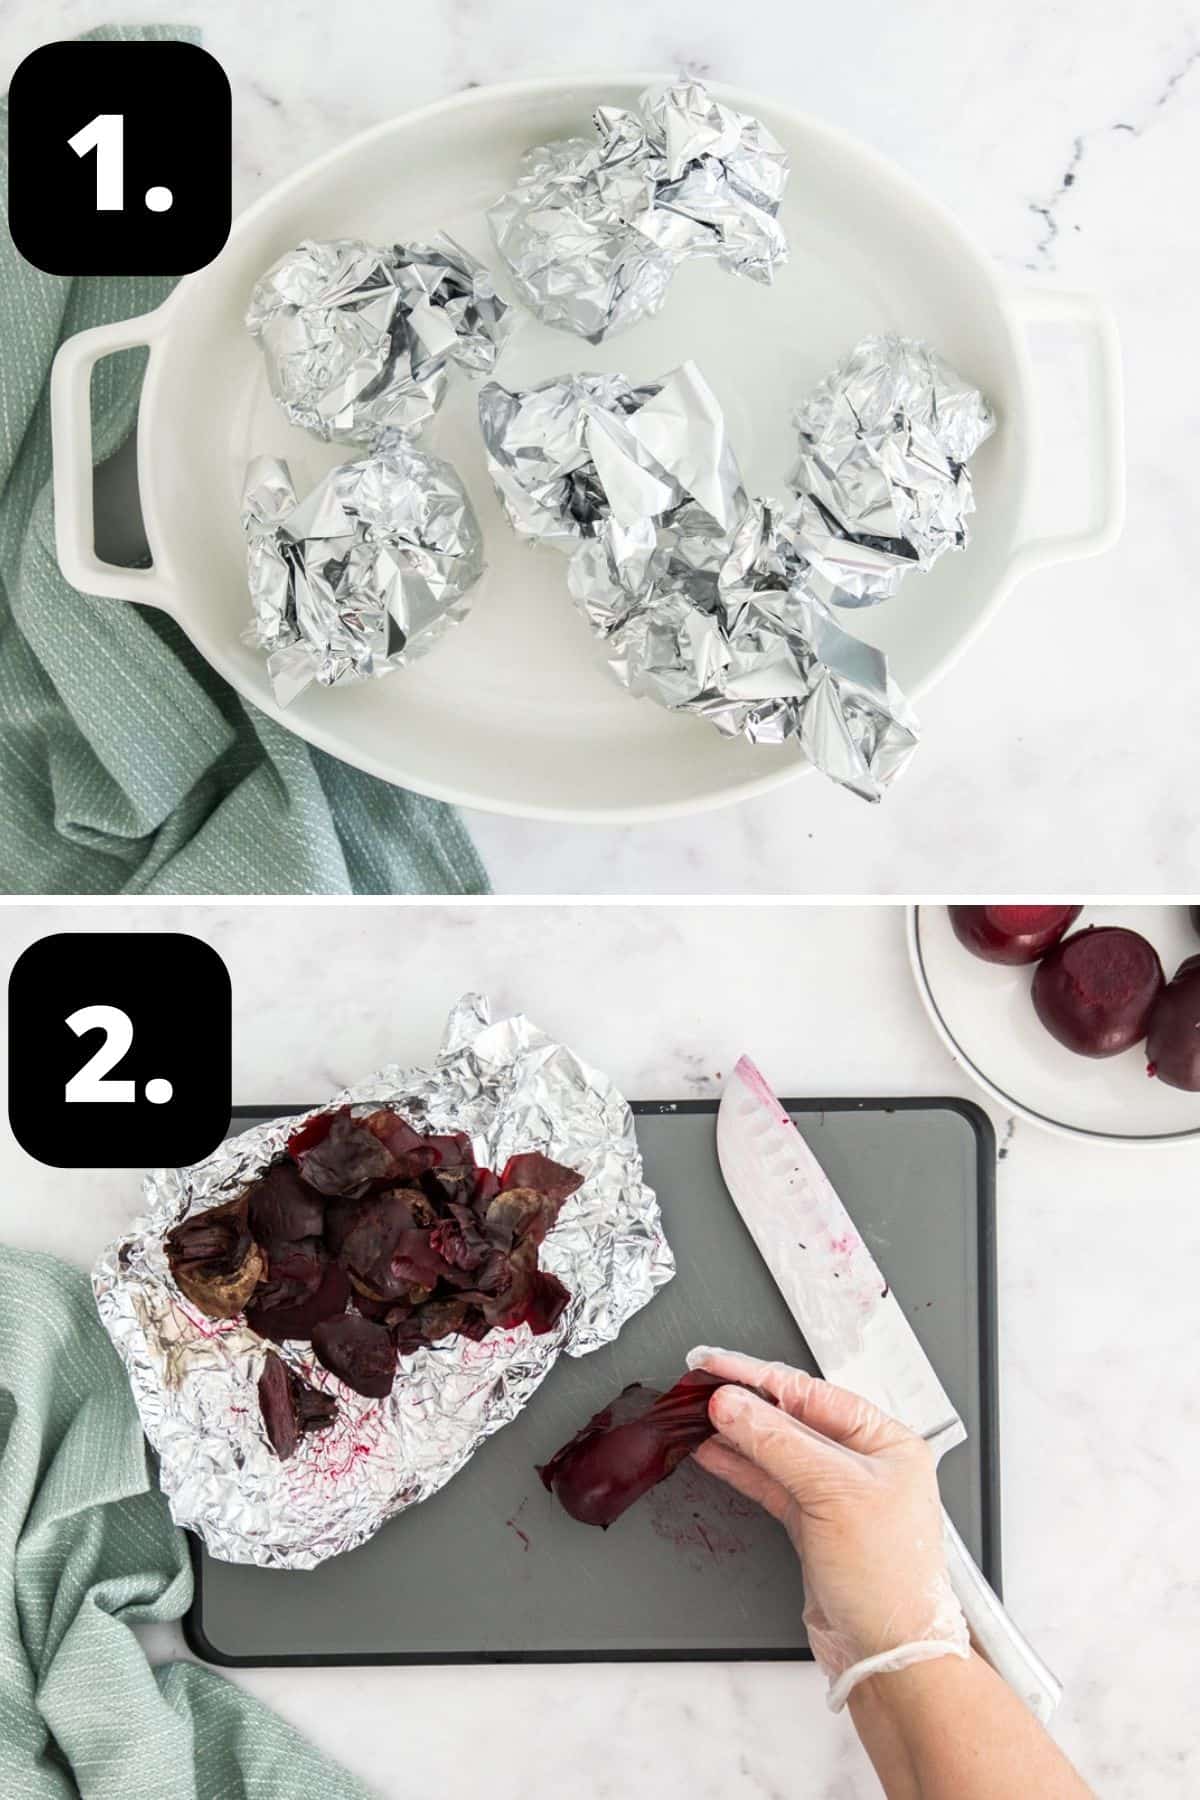 Steps 1-2 of preparing this recipe: the beetroot wrapped in foil ready to roast and peeling the roasted beetroot.